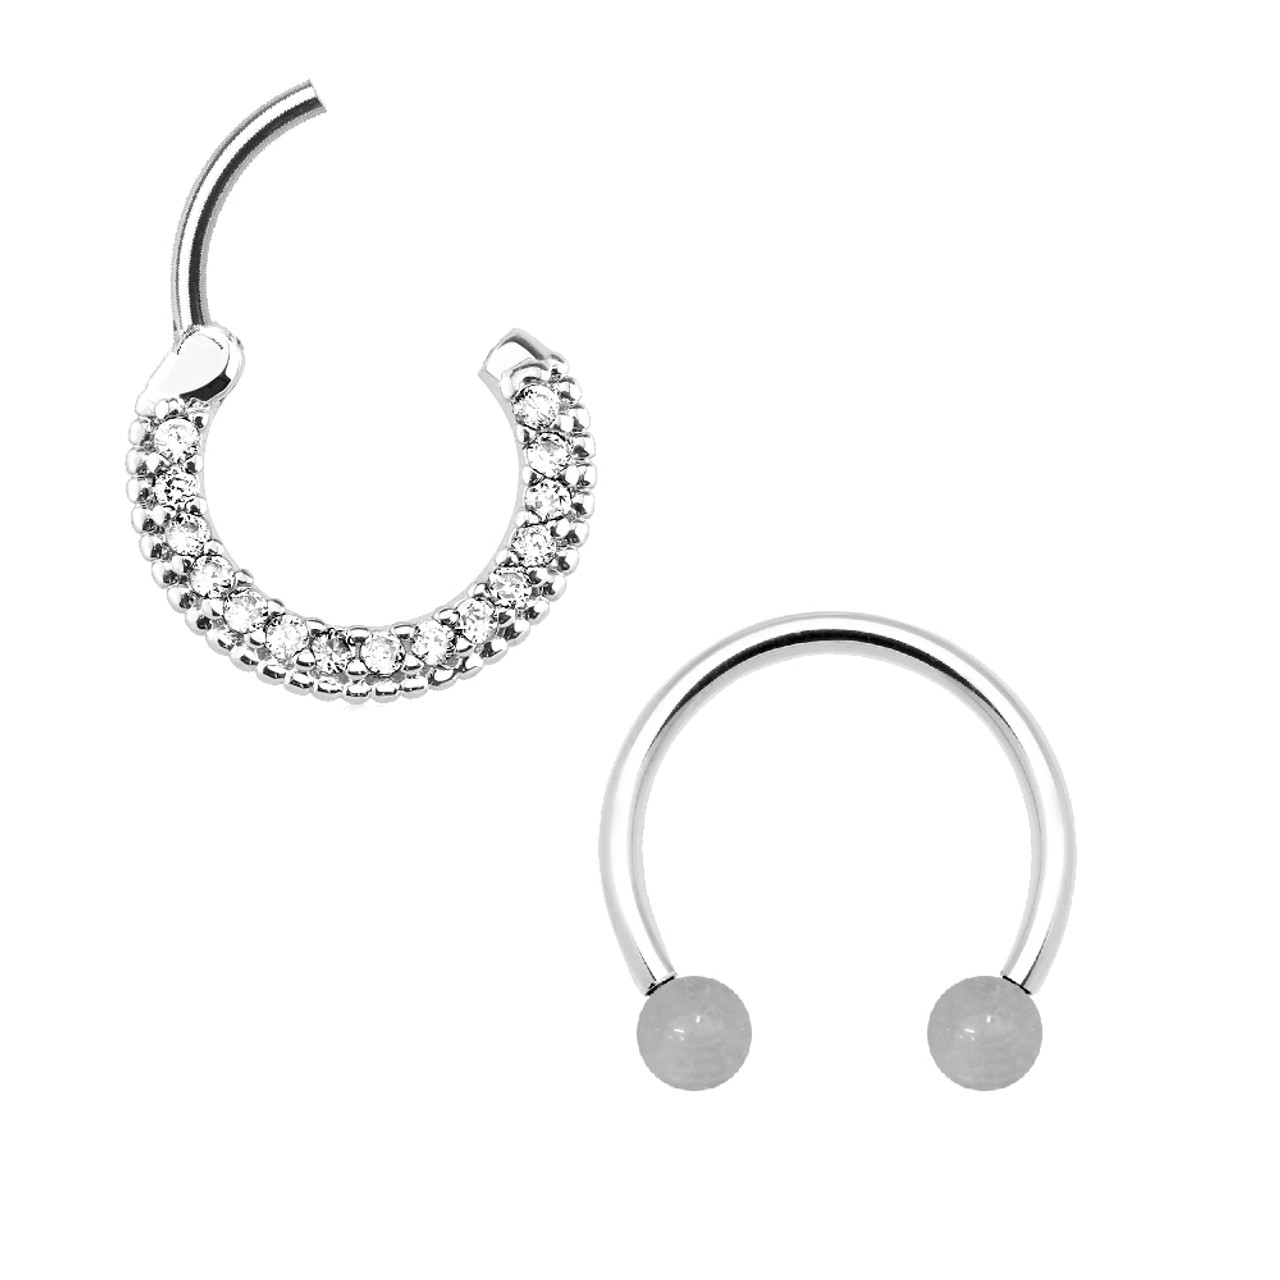 1pcs Nose Ring Double Nose Hoops Surgical Steel Piercing Jewelry G3S9 -  Walmart.com